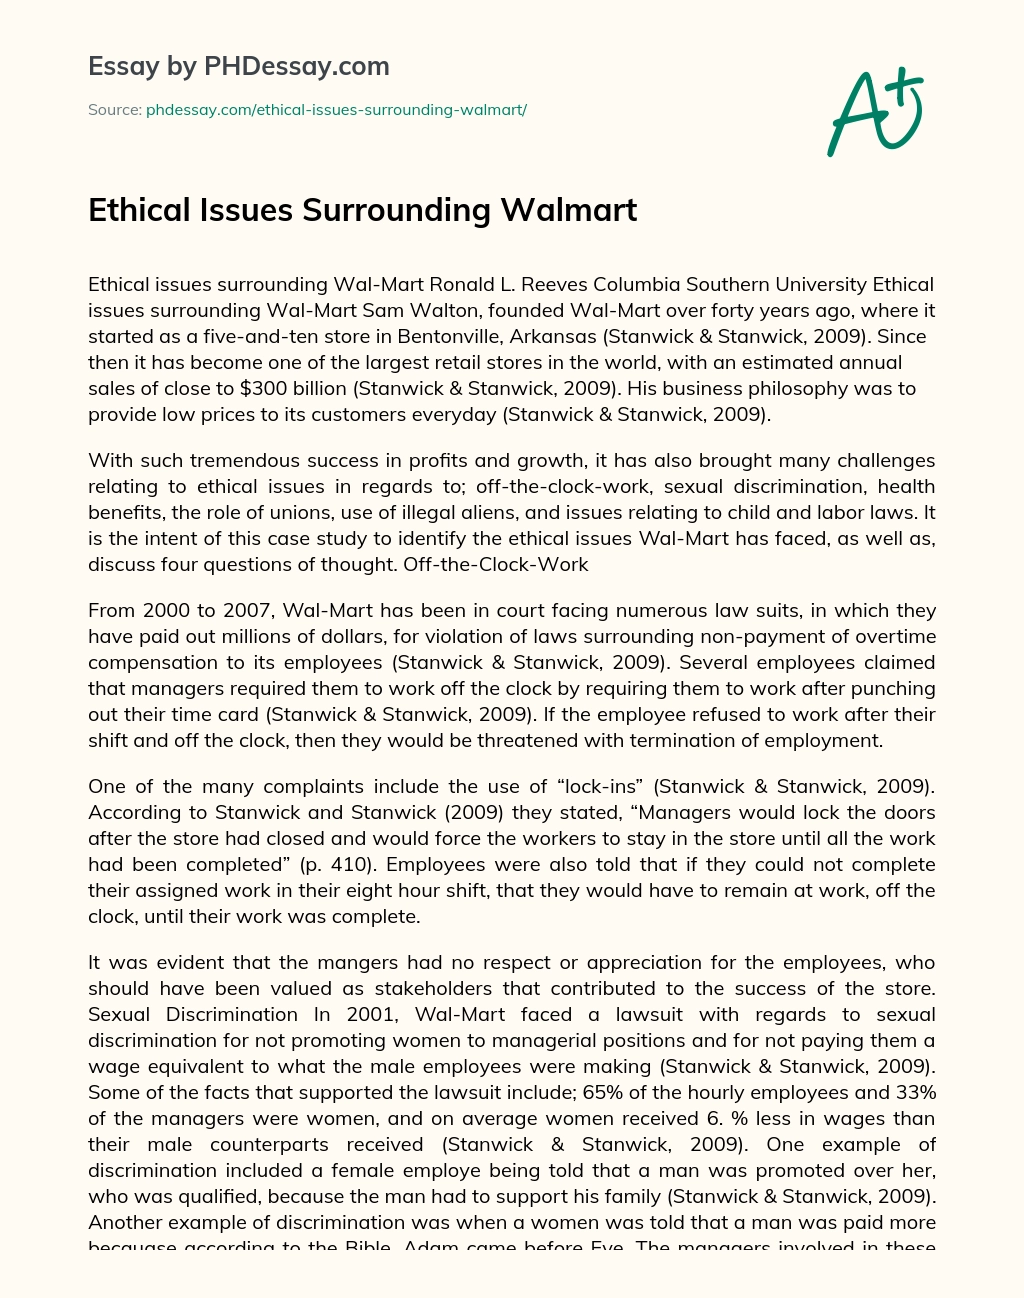 Ethical Issues Surrounding Walmart essay